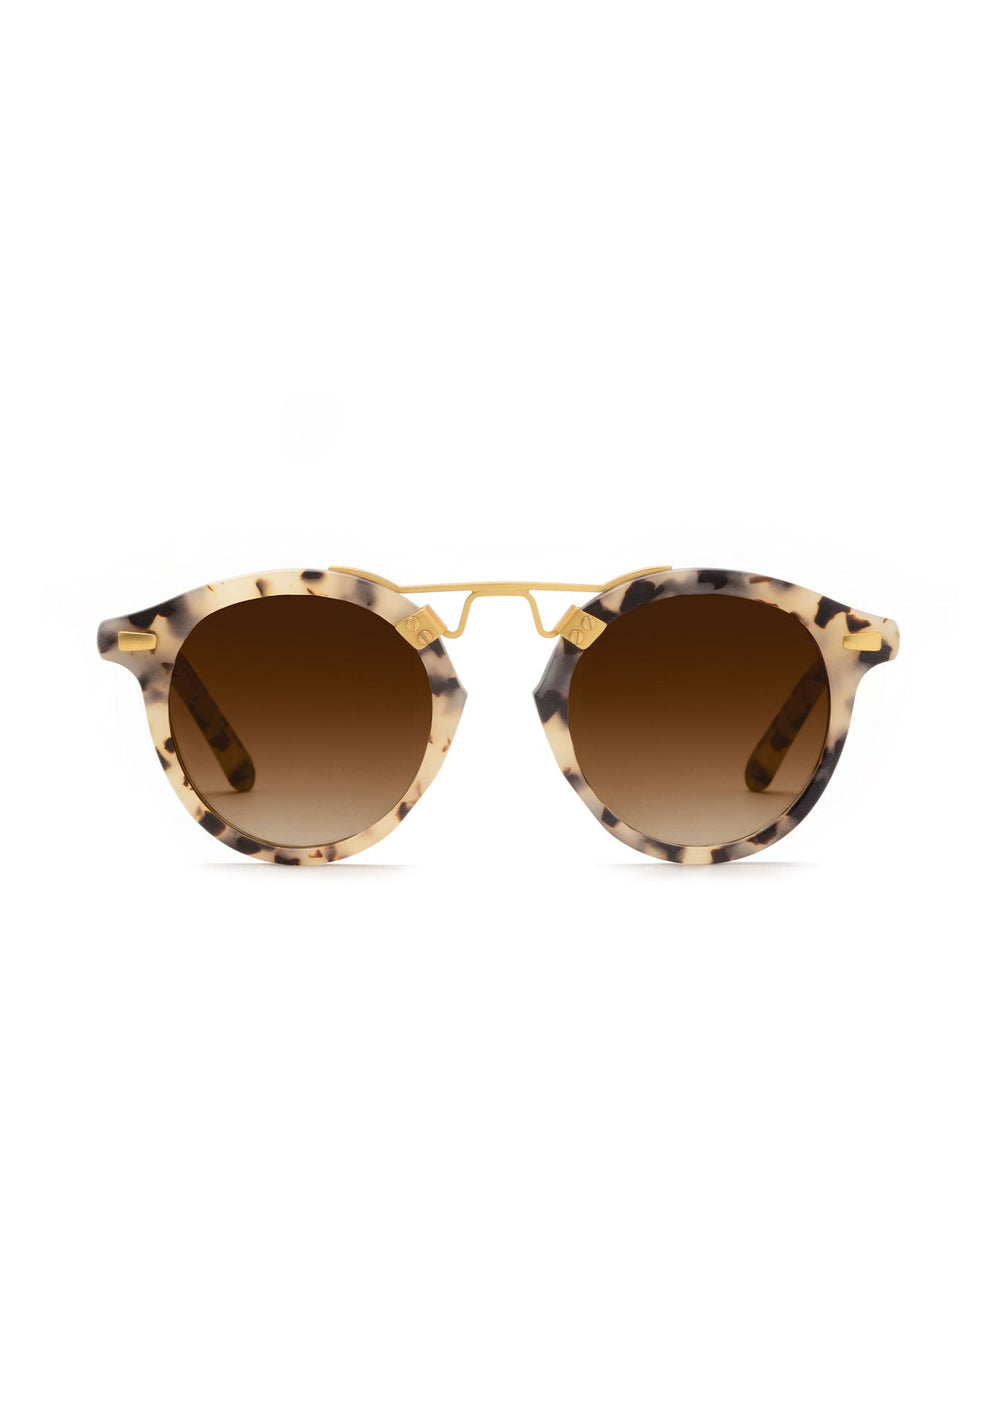 KREWE - ST. LOUIS KIDS | Matte Oyster 24K handcrafted, luxury tortoise shell sunglasses made for children featuring krewe's iconic double metal bridge